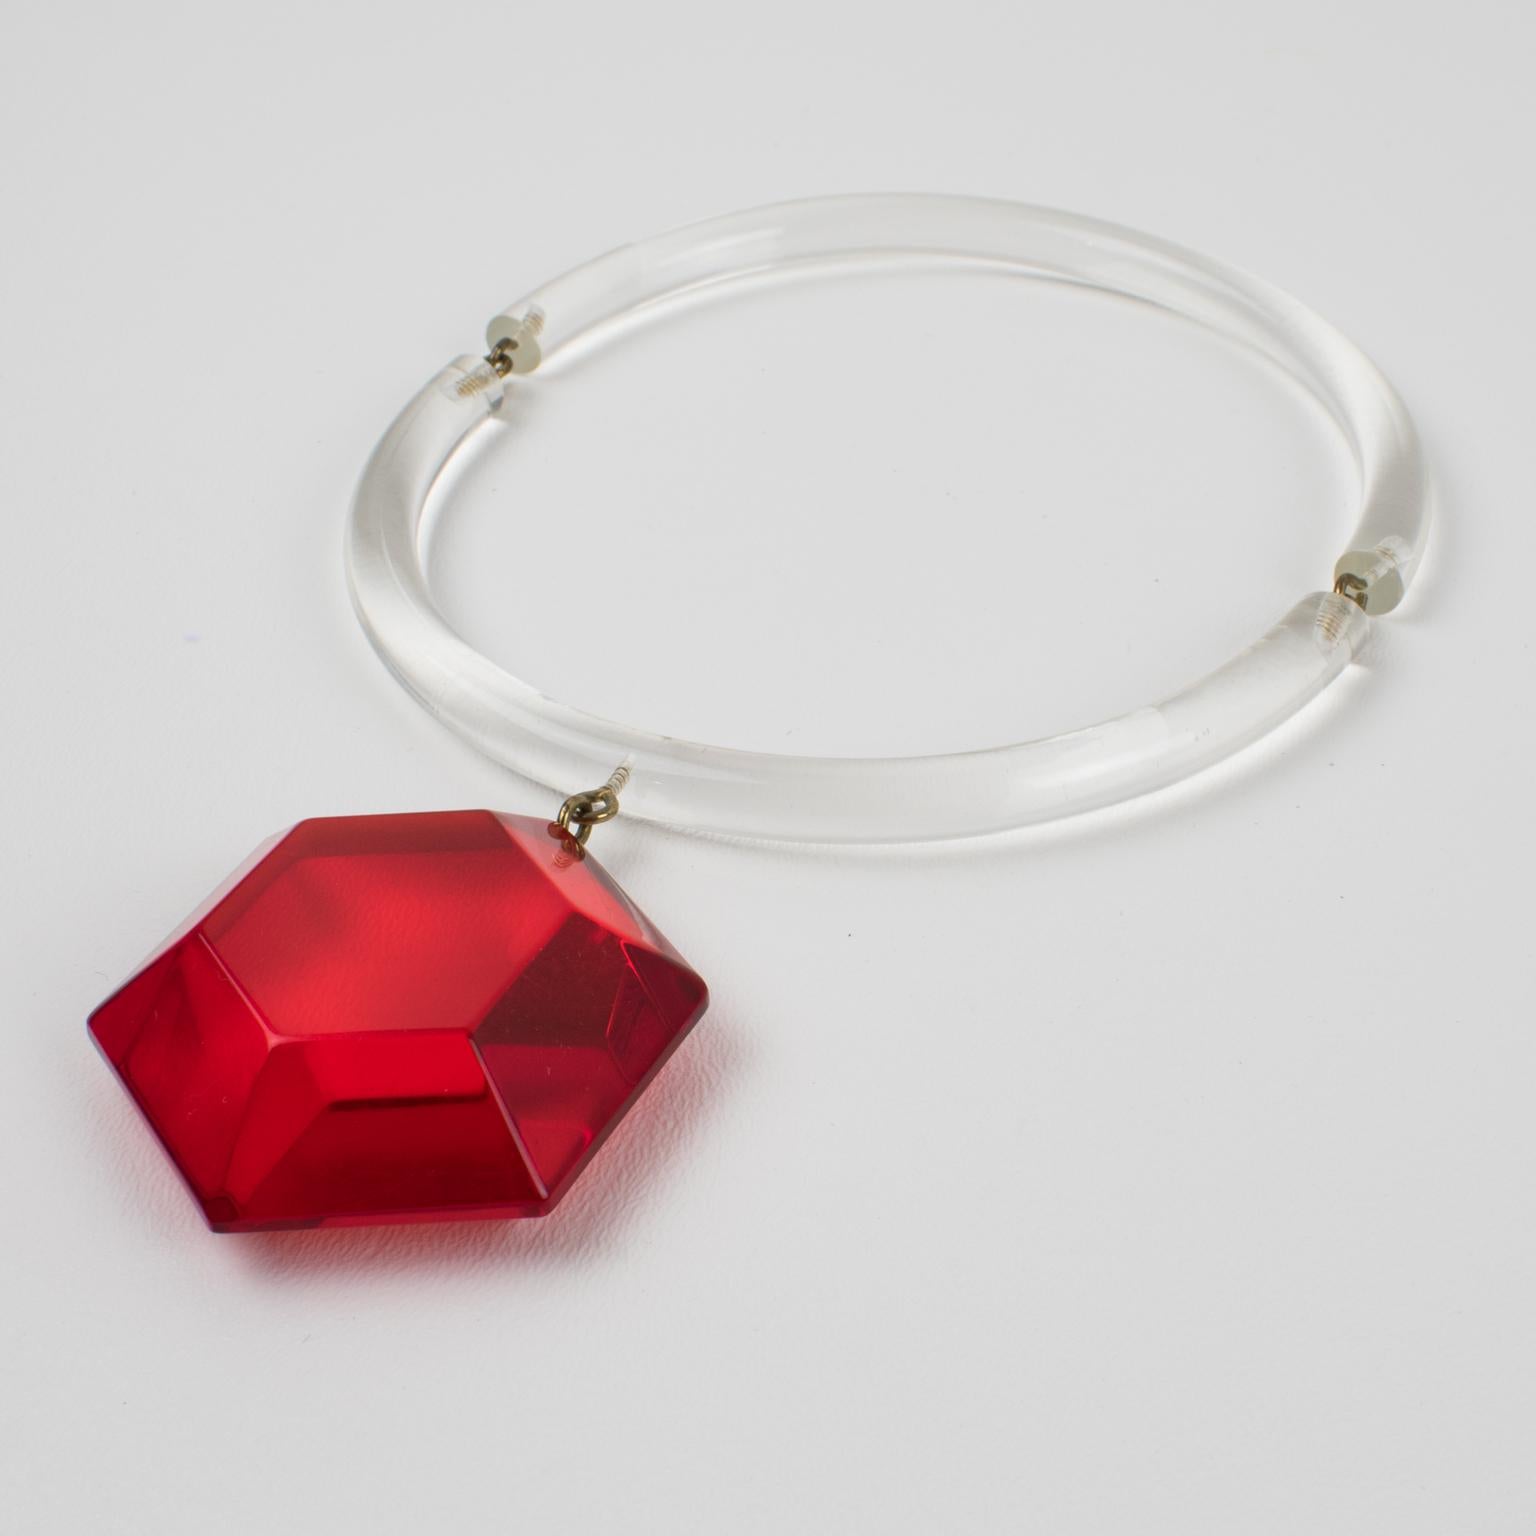 Judith Hendler Acrylic Lucite Neck Ring Necklace with Red Pendant 1